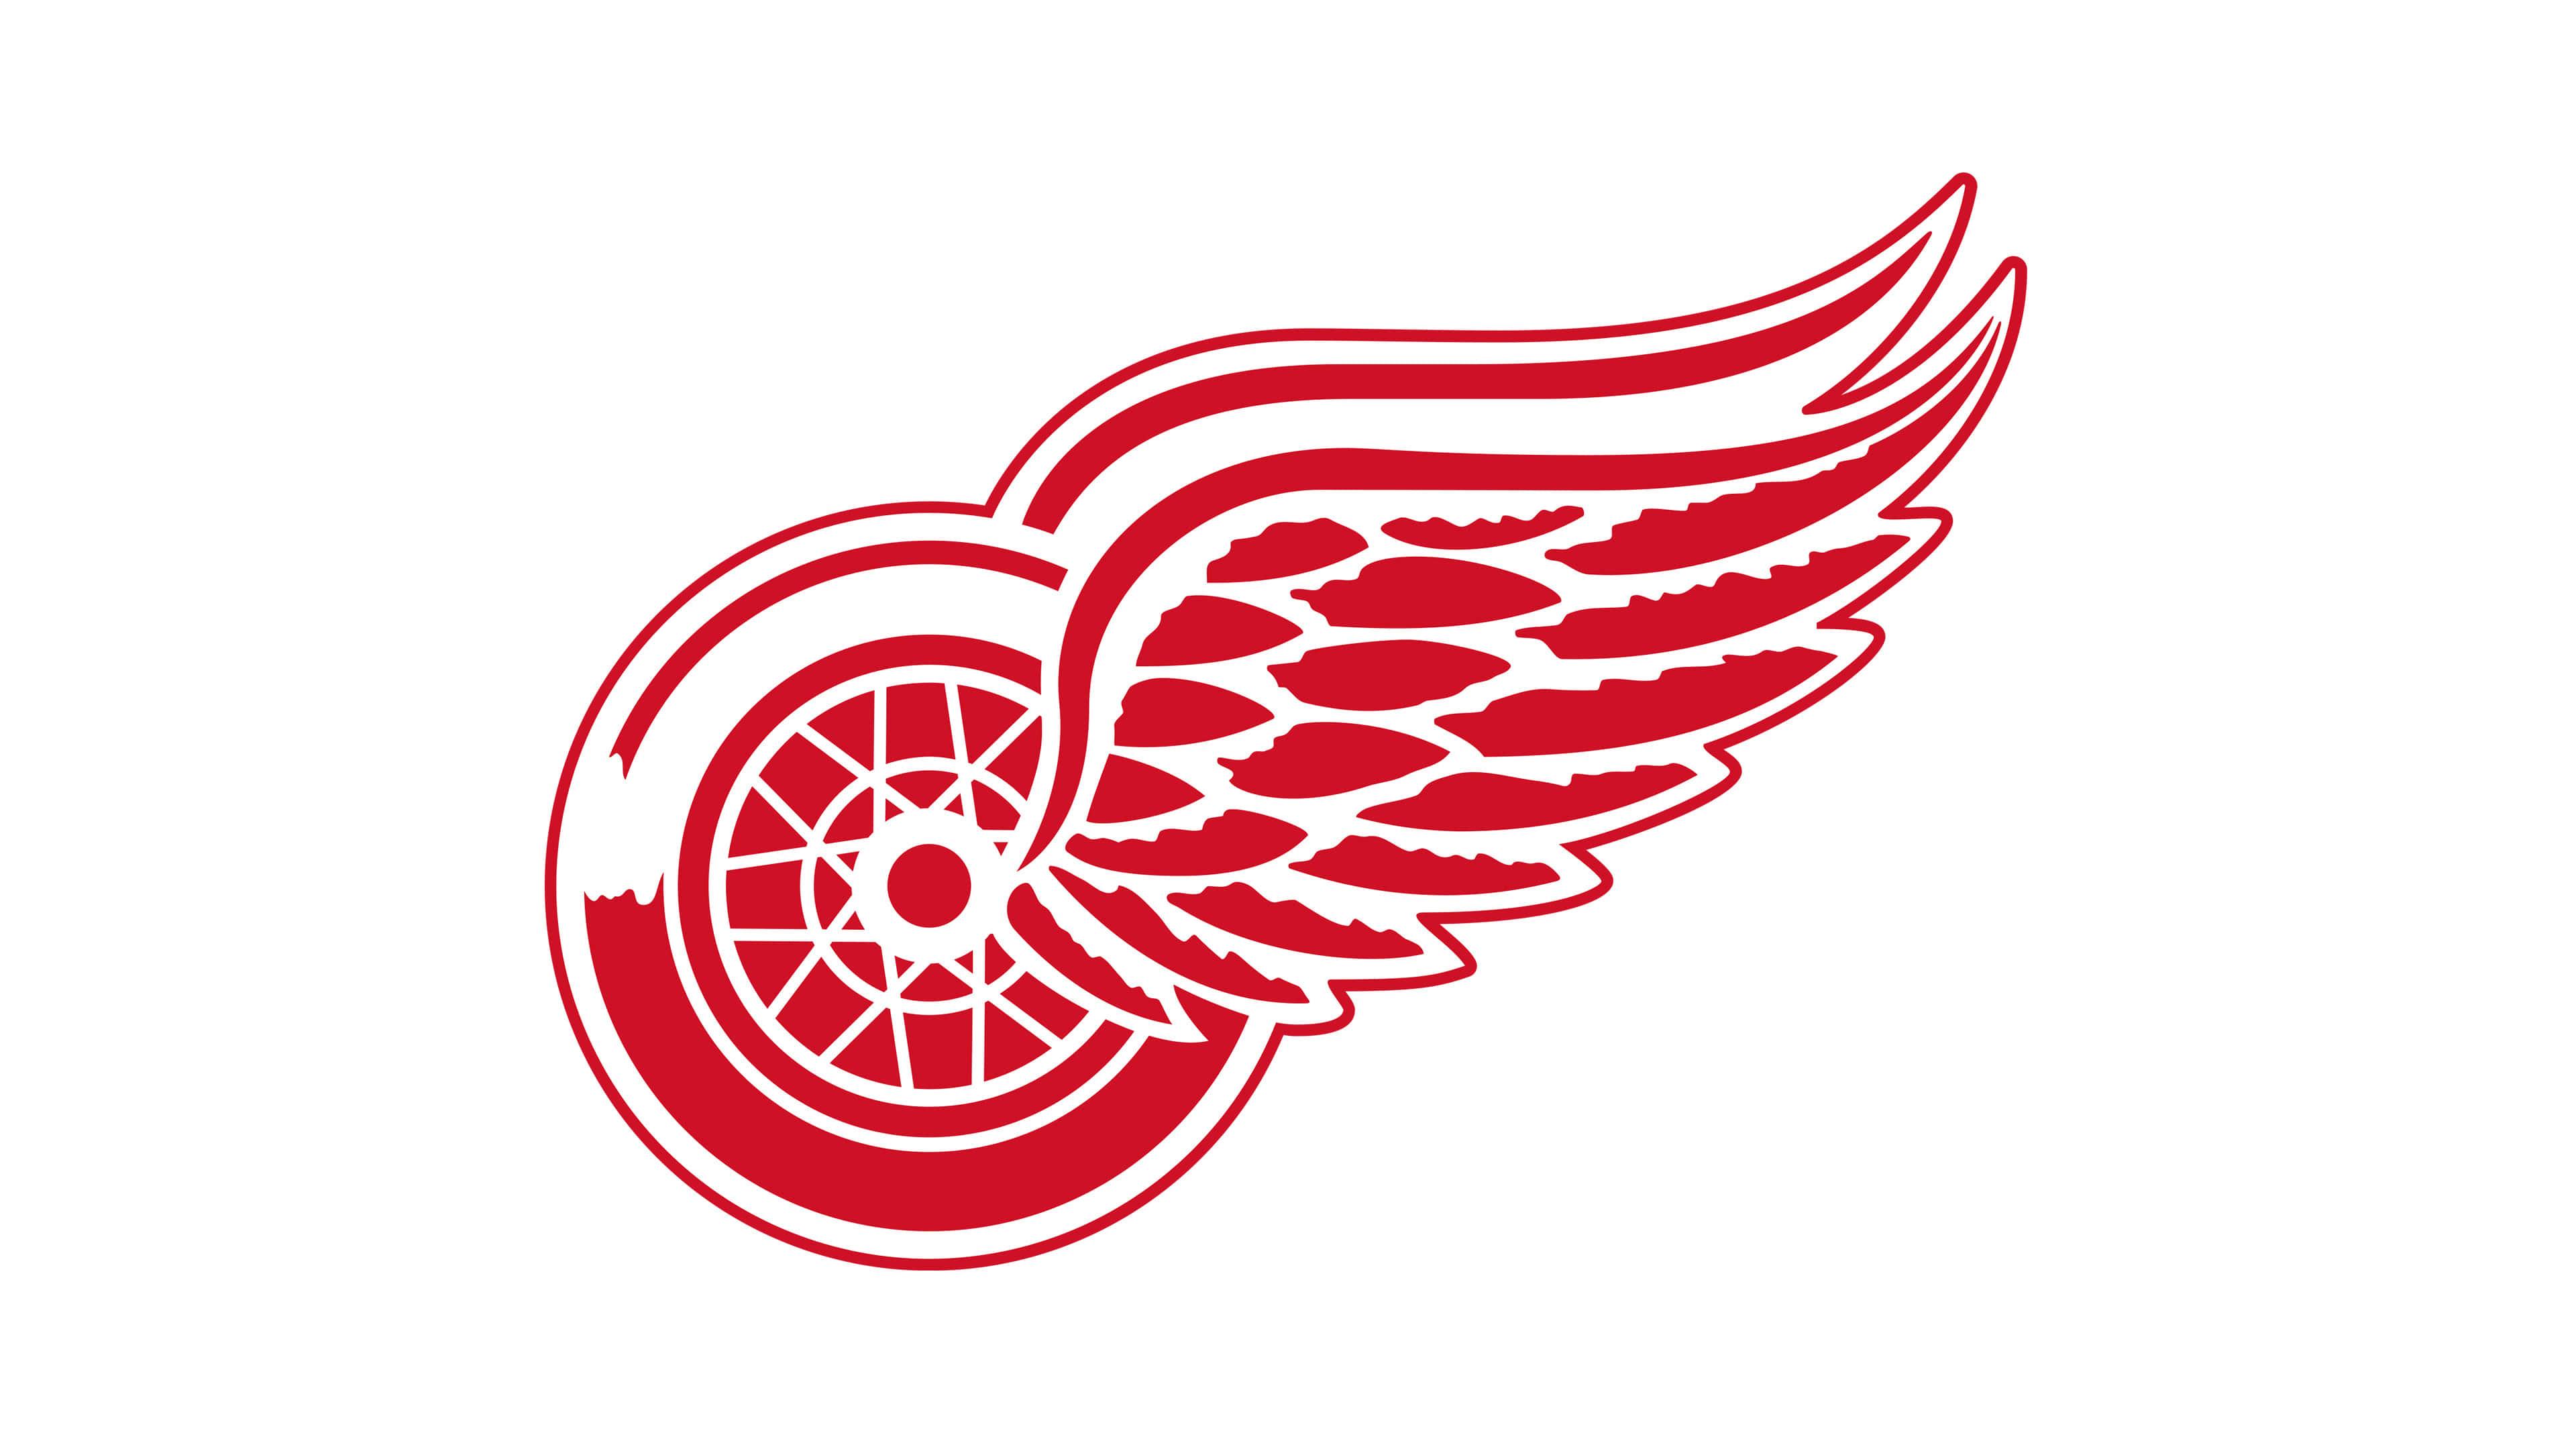 Detroit Red Wings: The team compete in the NHL as a member of the Atlantic Division in the Eastern Conference. 3840x2160 4K Wallpaper.